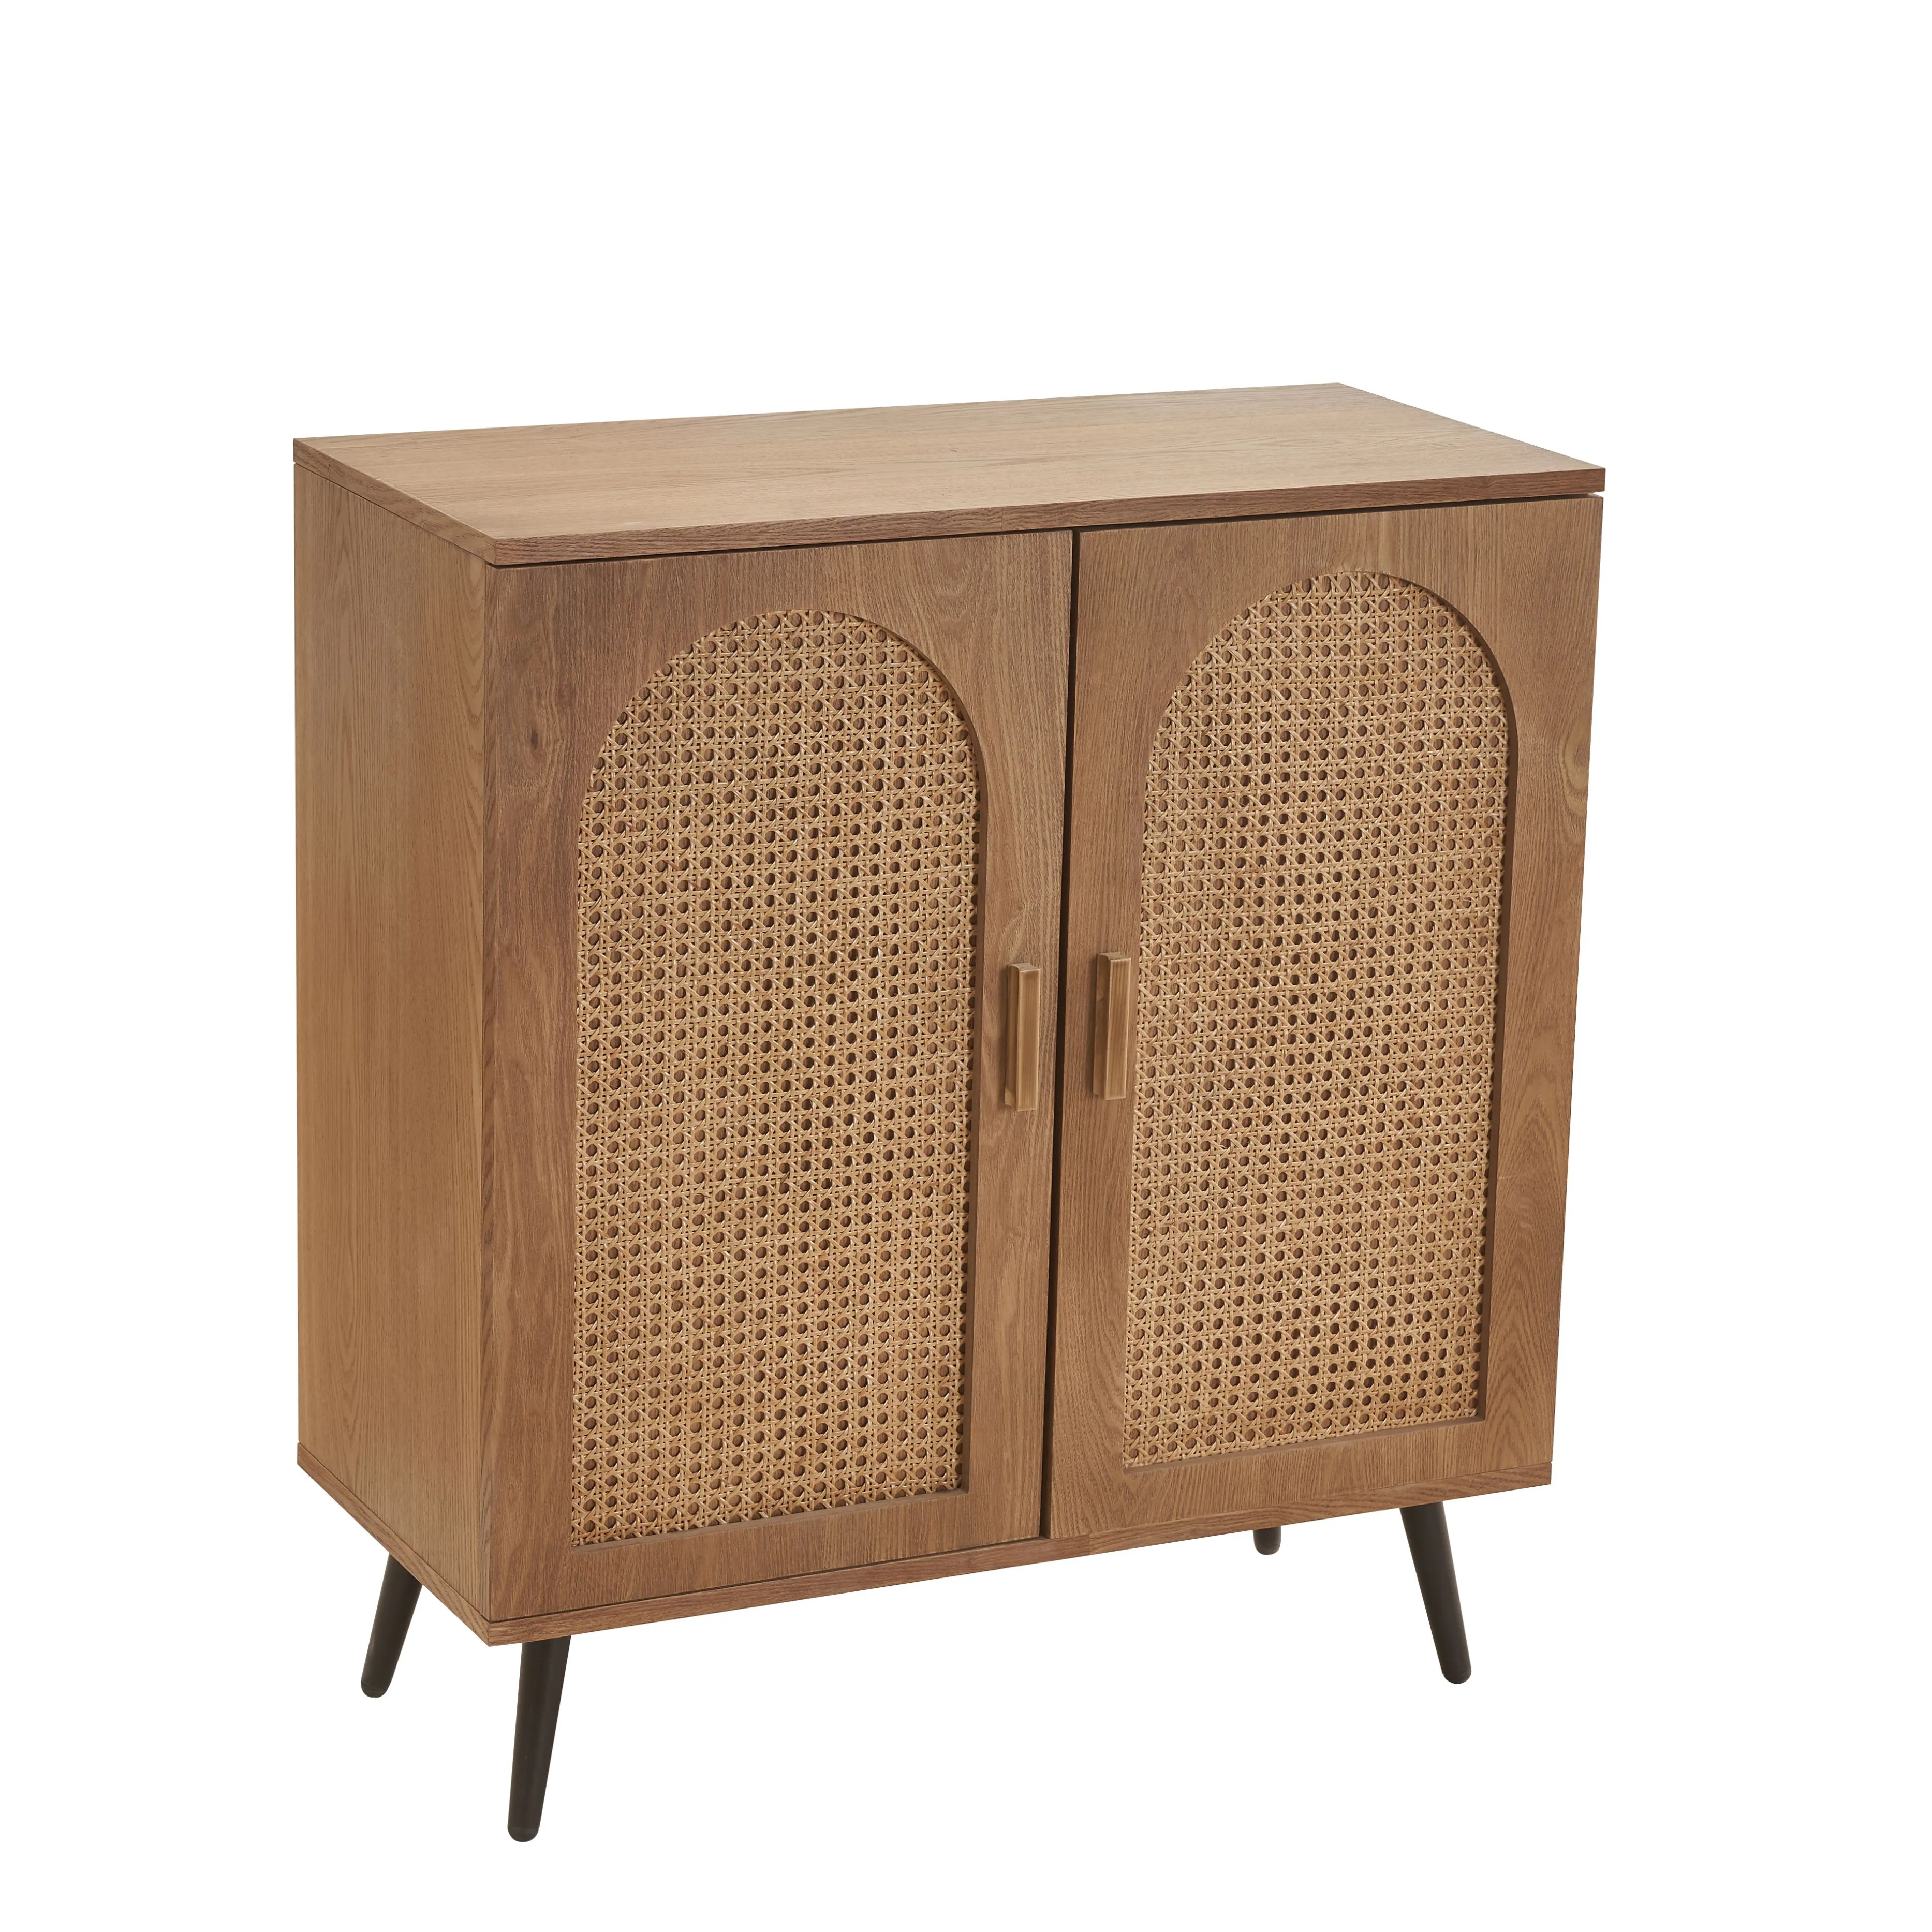 Kitchen solid wood tableware cabinet, living room, rattan woven lockers with adjustable shelves